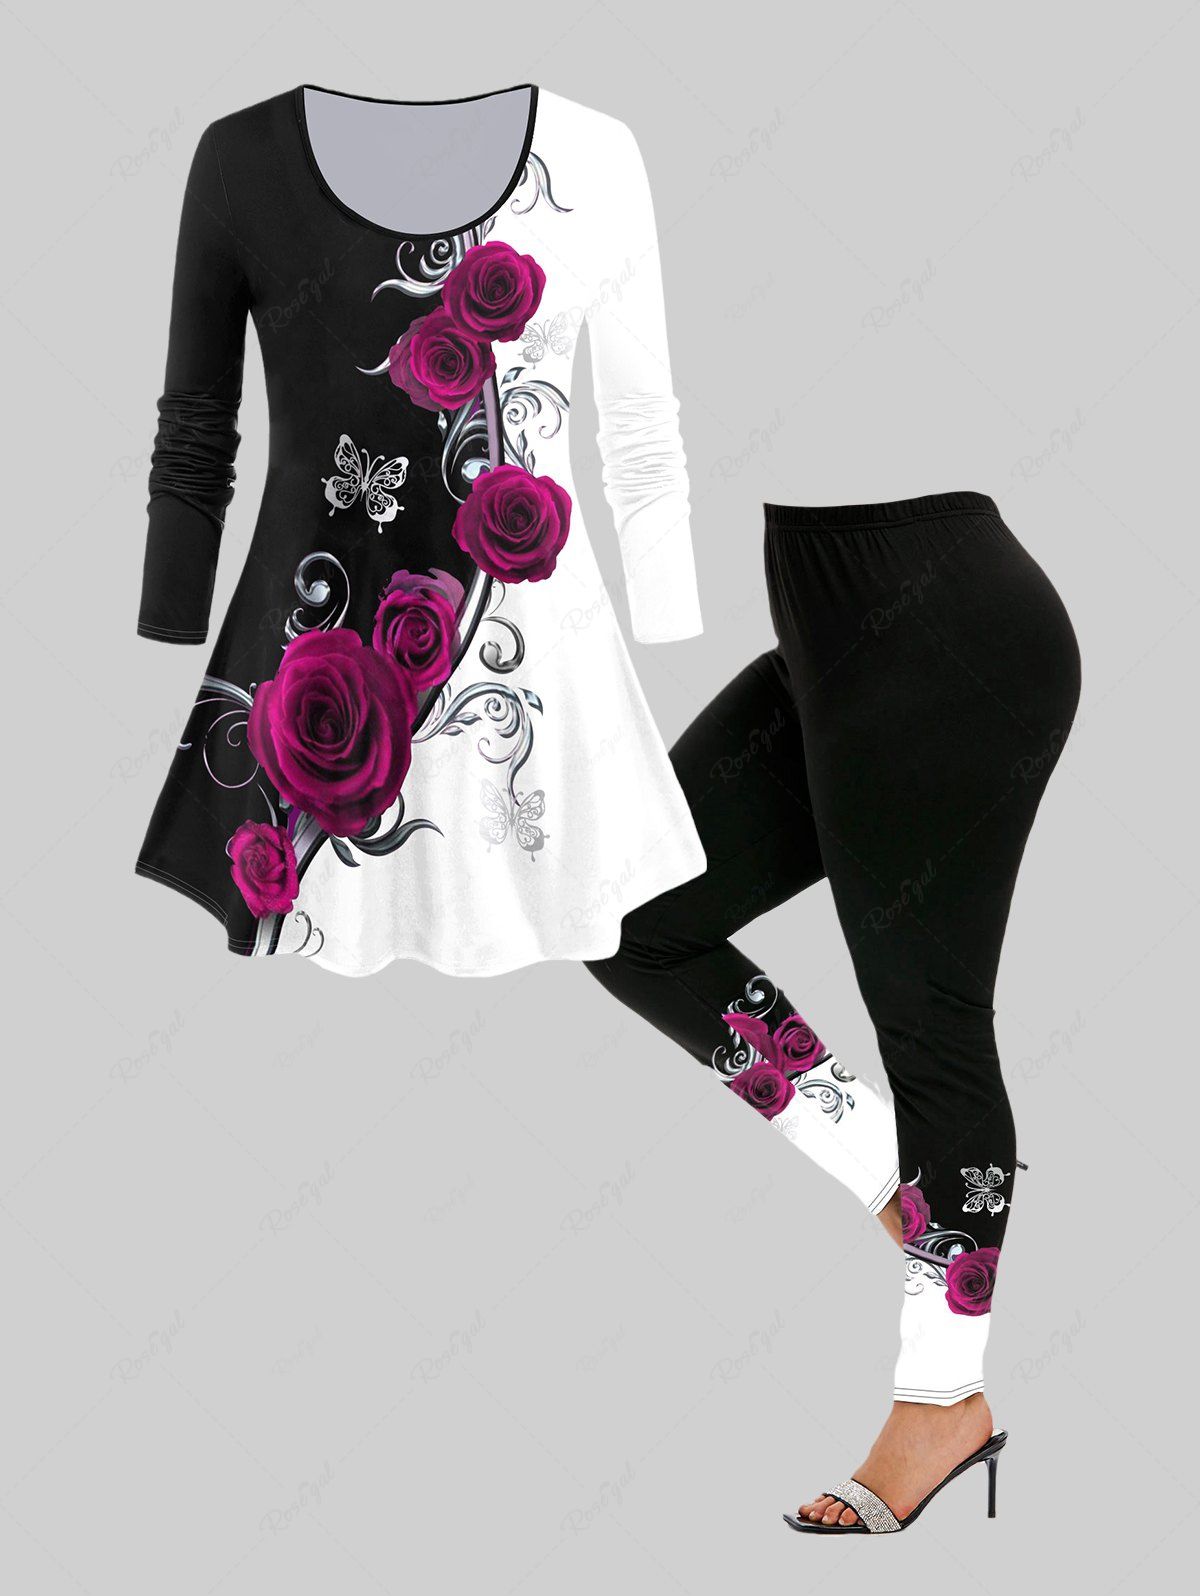 Chic 3D Rose Printed Colorblock Tee and Leggings Plus Size Outfit  